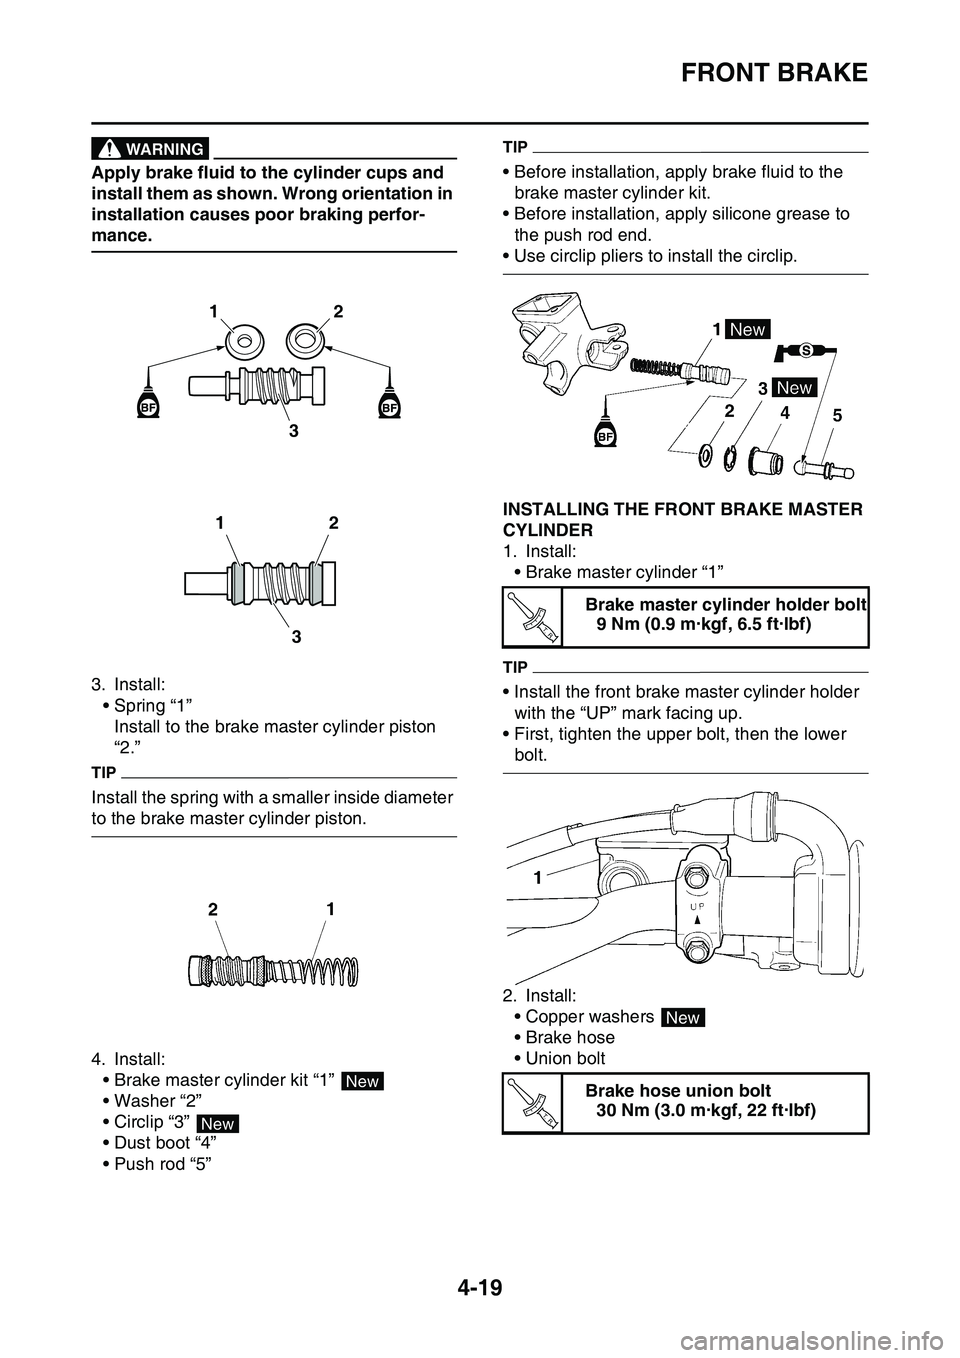 YAMAHA YZ450F 2014  Owners Manual FRONT BRAKE
4-19
WARNING
Apply brake fluid to the cylinder cups and 
install them as shown. Wrong orientation in 
installation causes poor braking perfor
-
mance.
3. Install:
• Spring “1” 
Insta